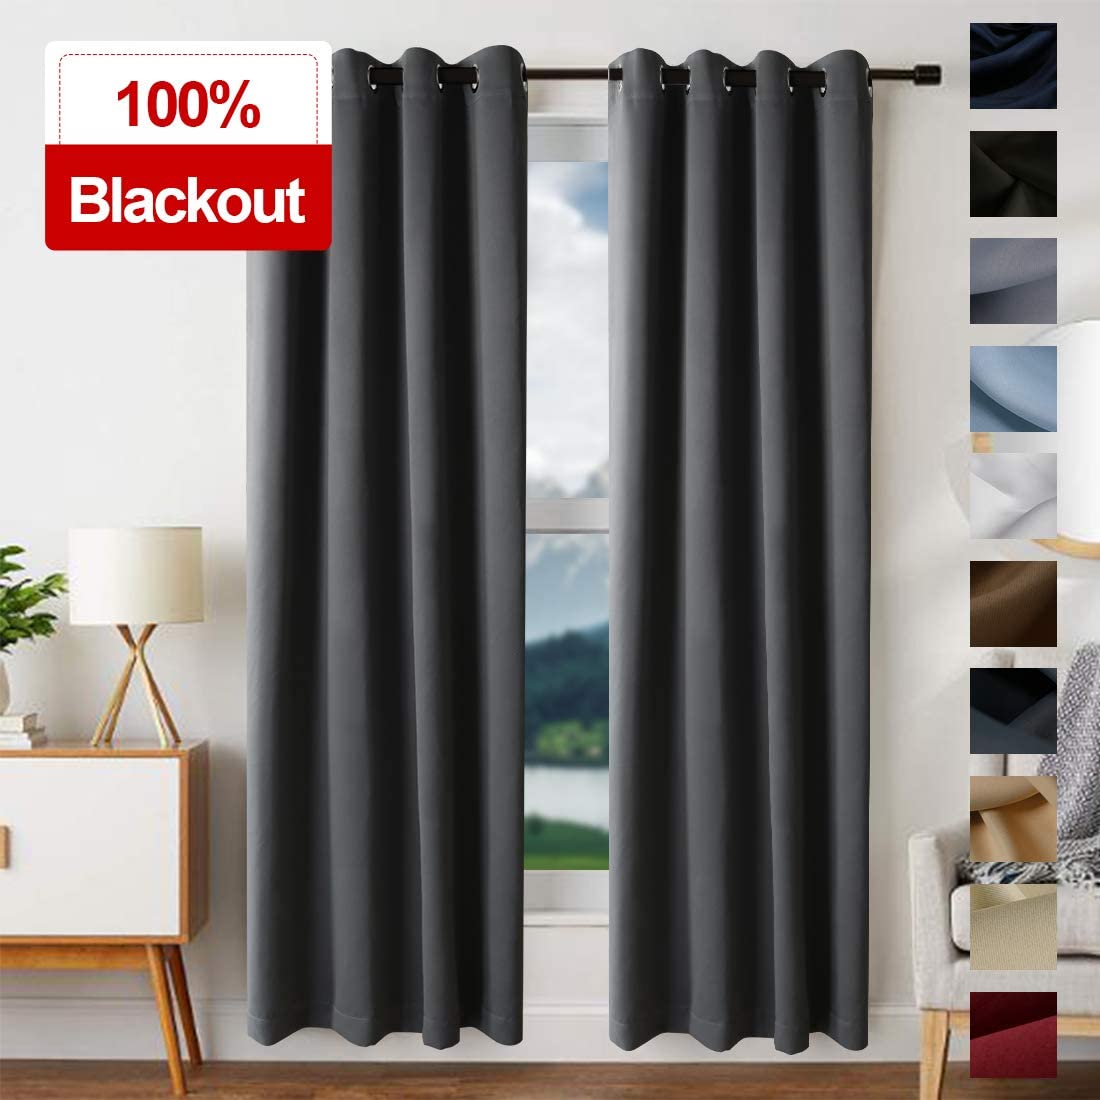 EDILLY Thermal Insulated Grommet Blackout Curtains, 2-Panels